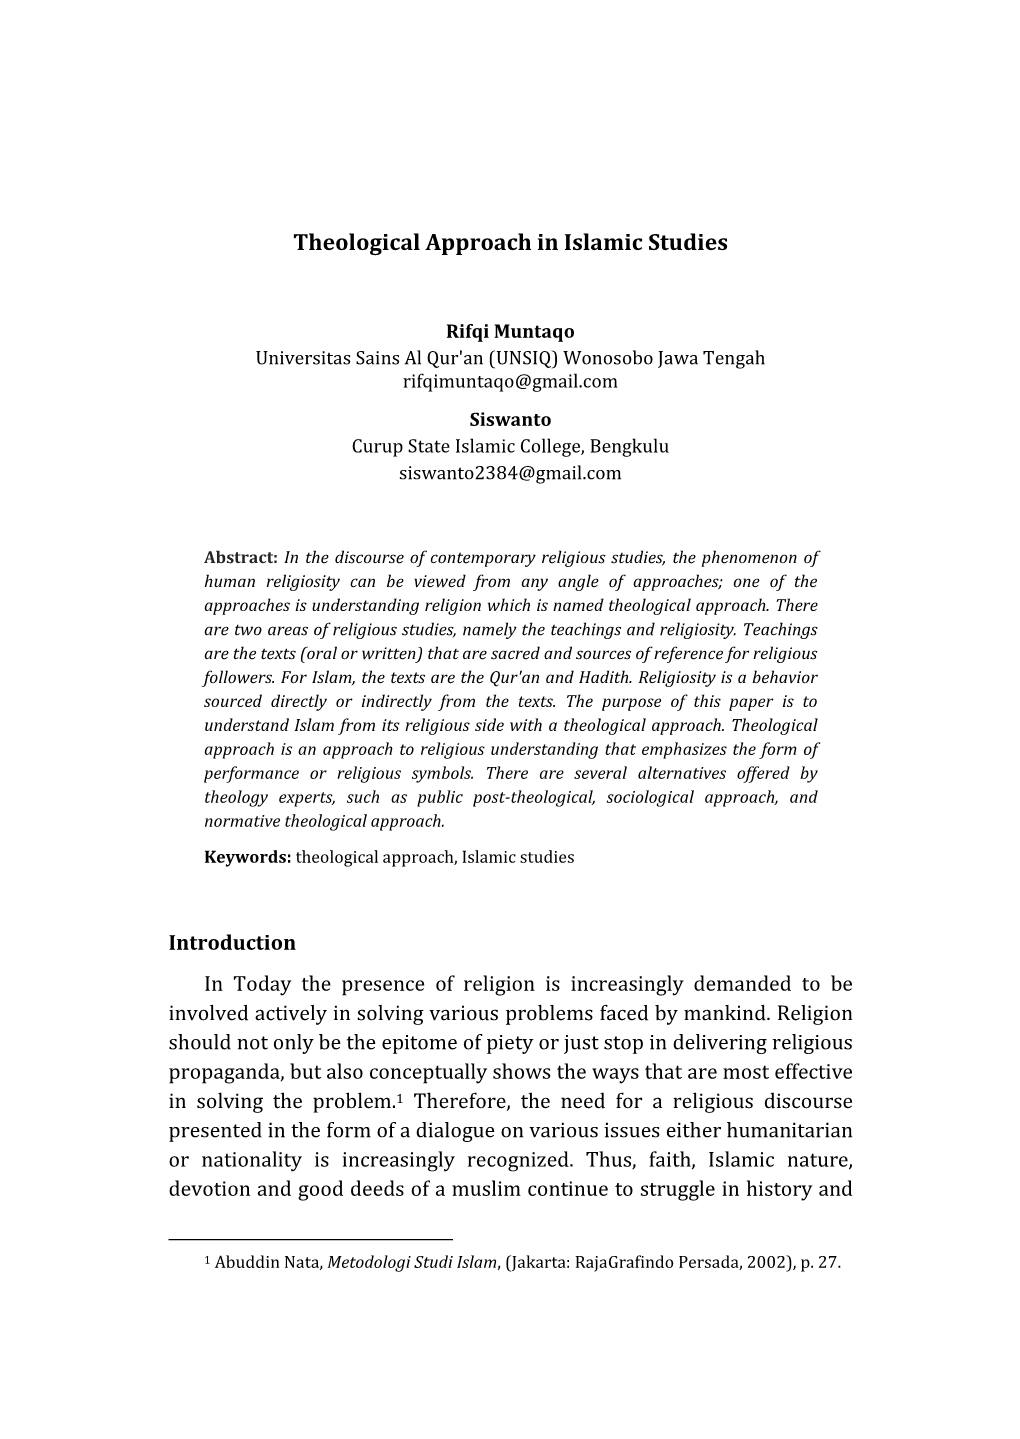 Theological Approach in Islamic Studies